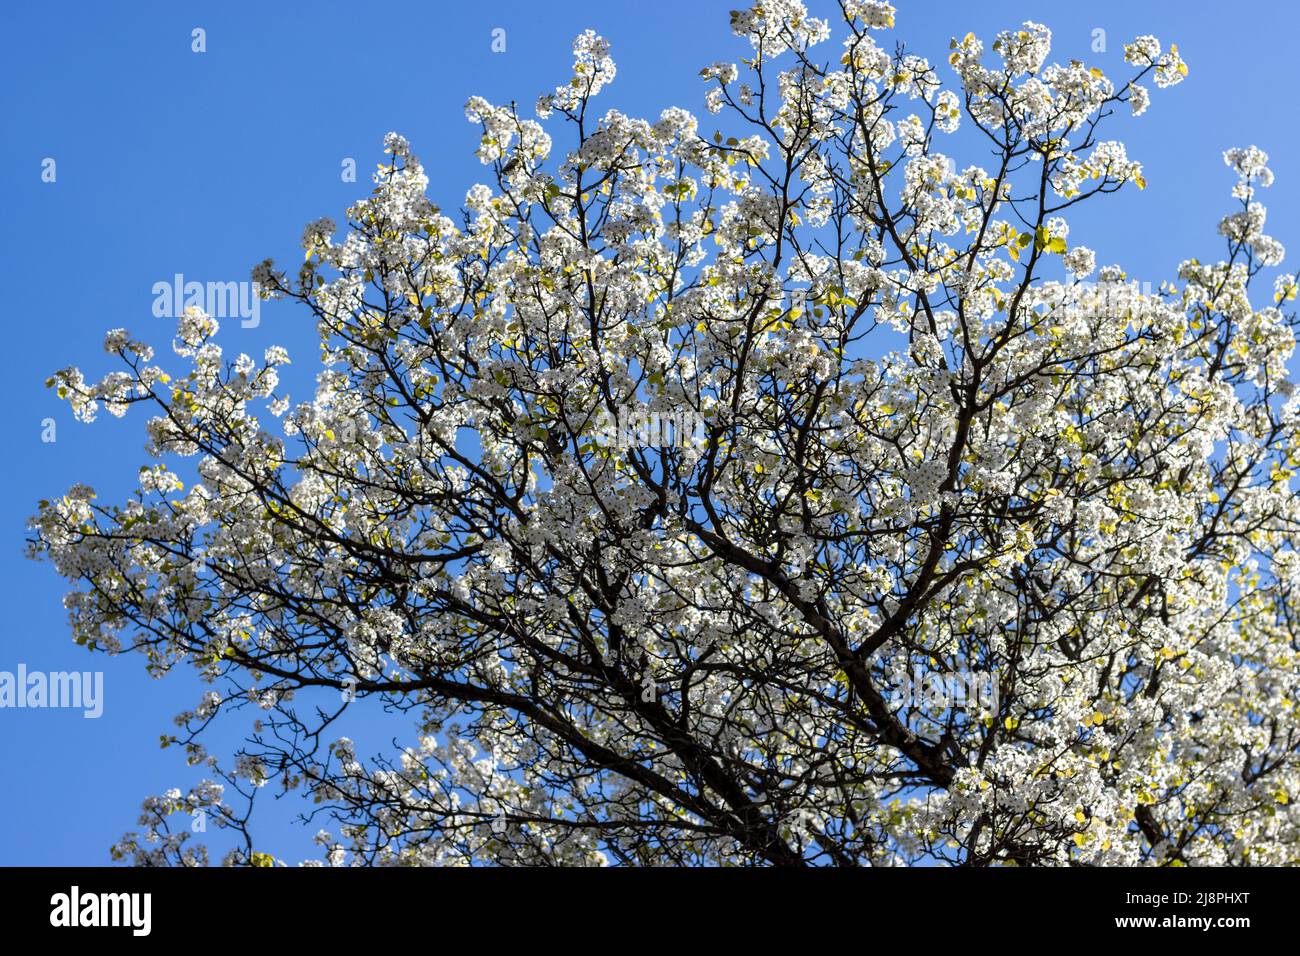 Tree with White Flowers in Spring Stock Photo